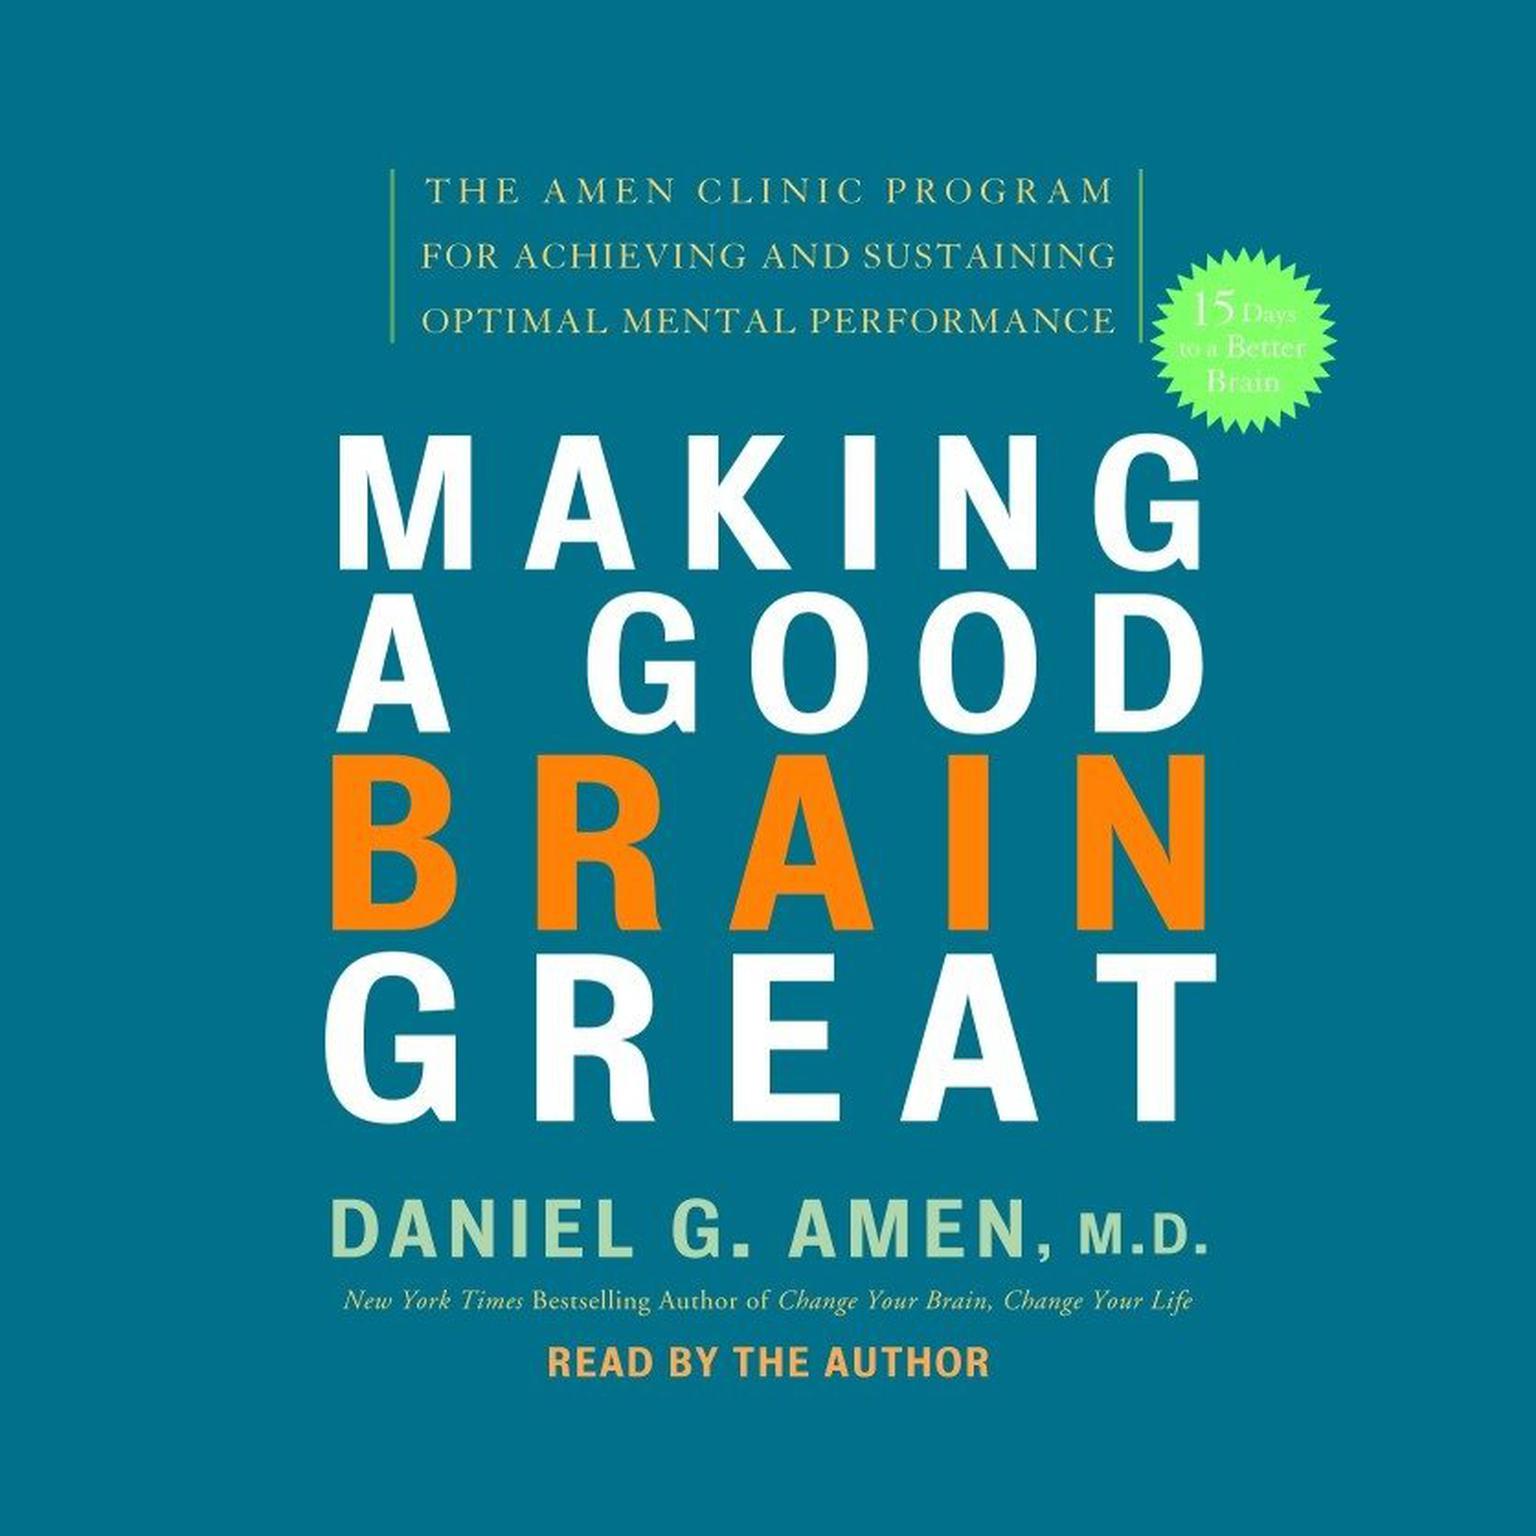 Making a Good Brain Great (Abridged): The Amen Clinic Program for Achieving and Sustaining Optimal Mental Performance Audiobook, by Daniel G. Amen